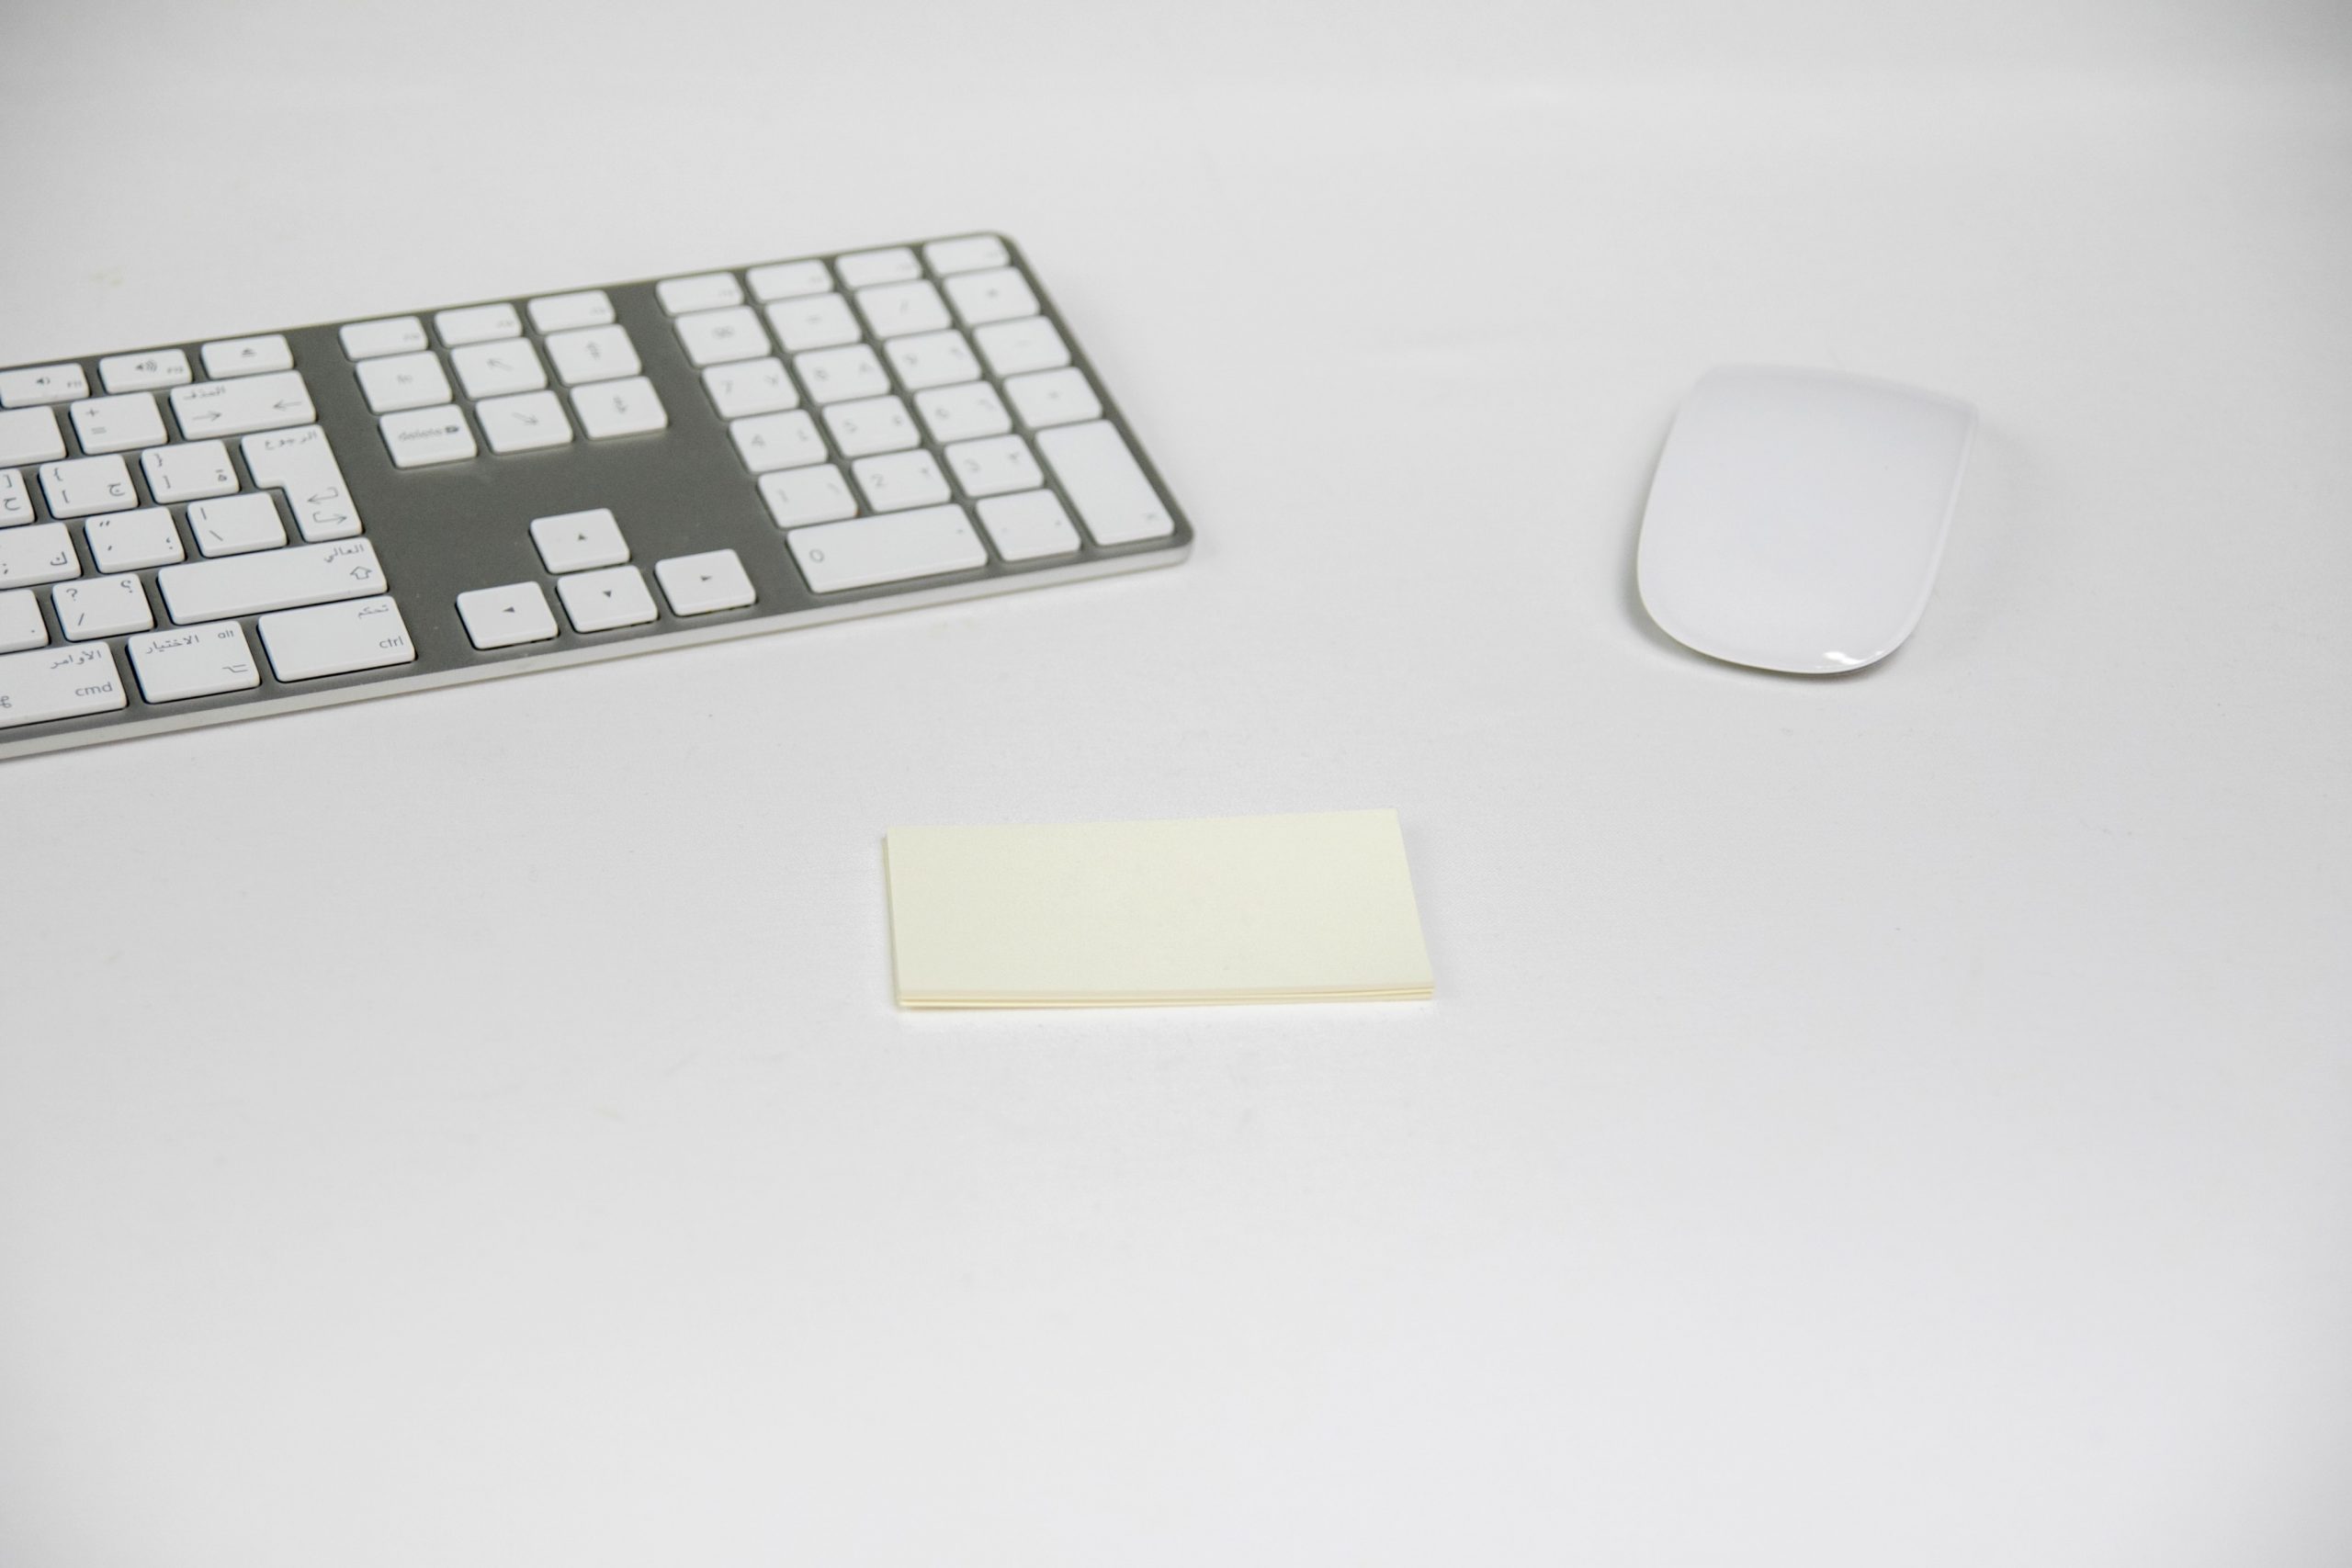 Apple magic mouse and keyboard